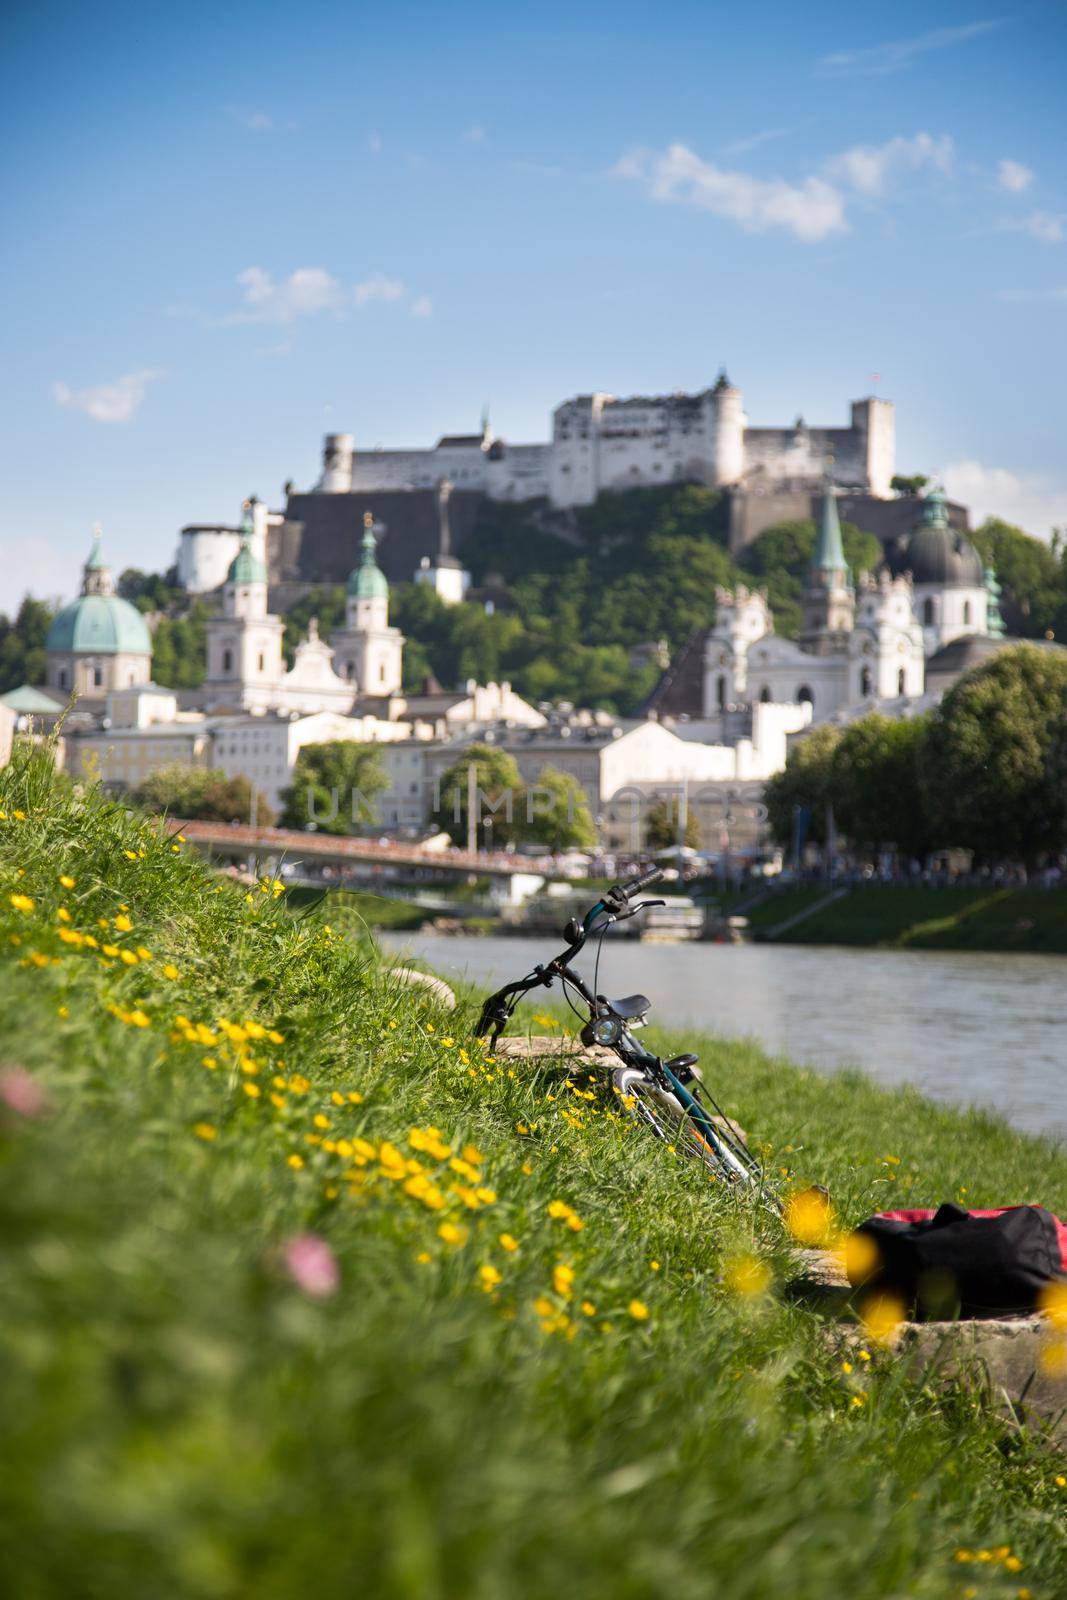 Salzburg summer time: Panoramic city landscape with Salzach with green grass and historic district. Bicycle in the foreground. by Daxenbichler